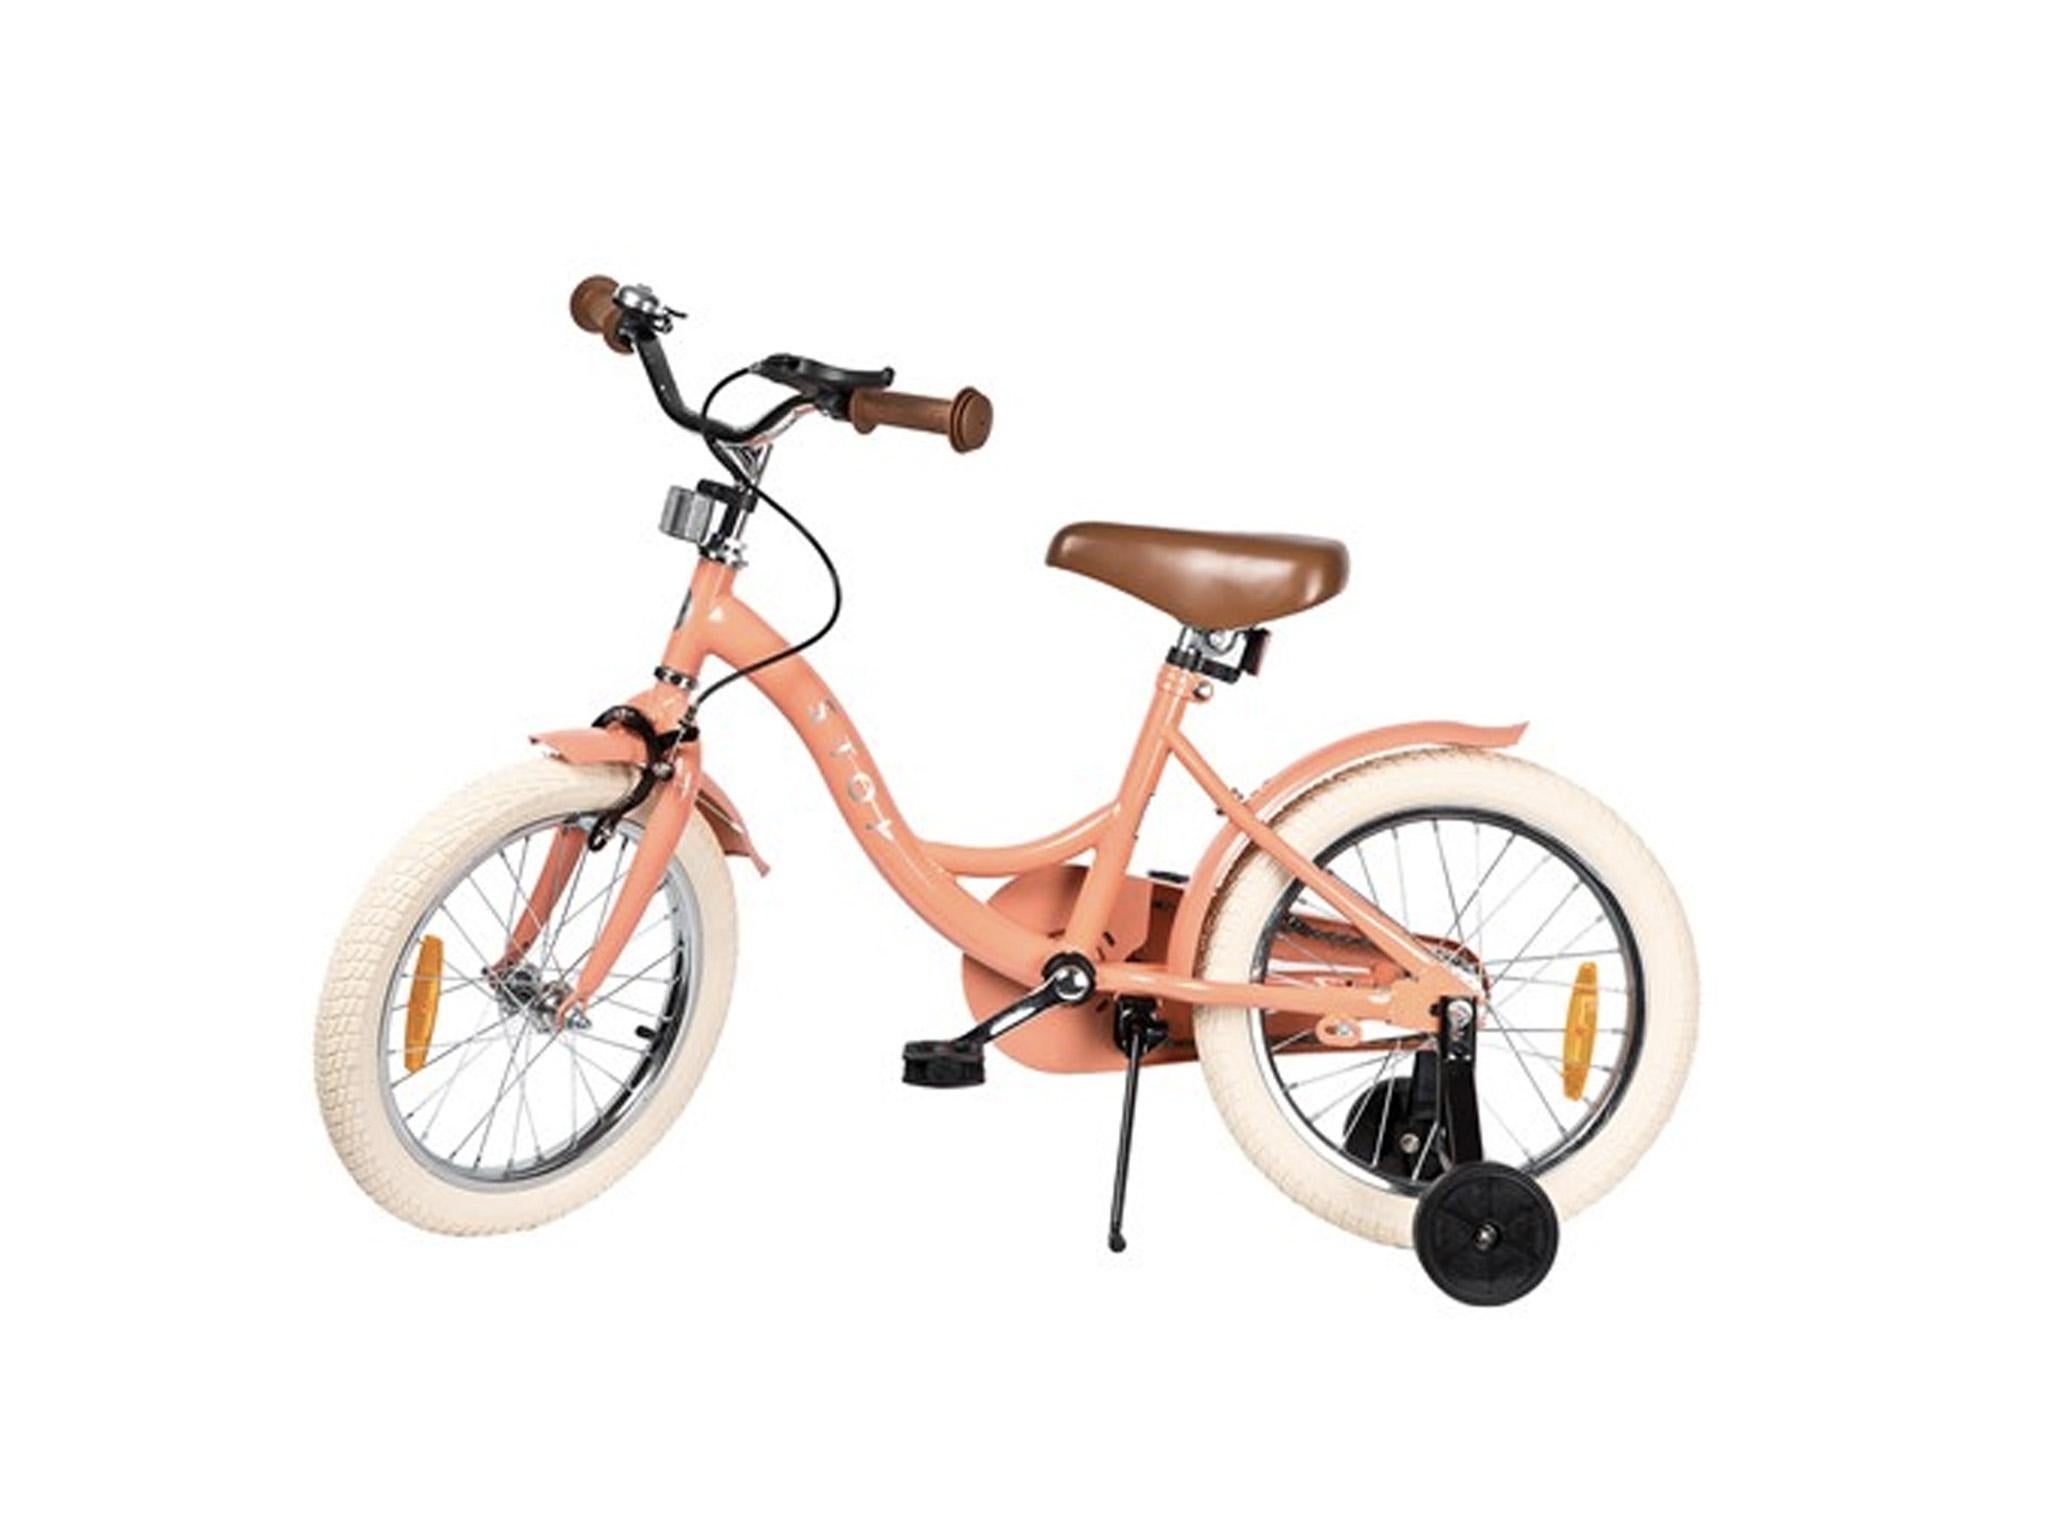 best bike for a 7 year old